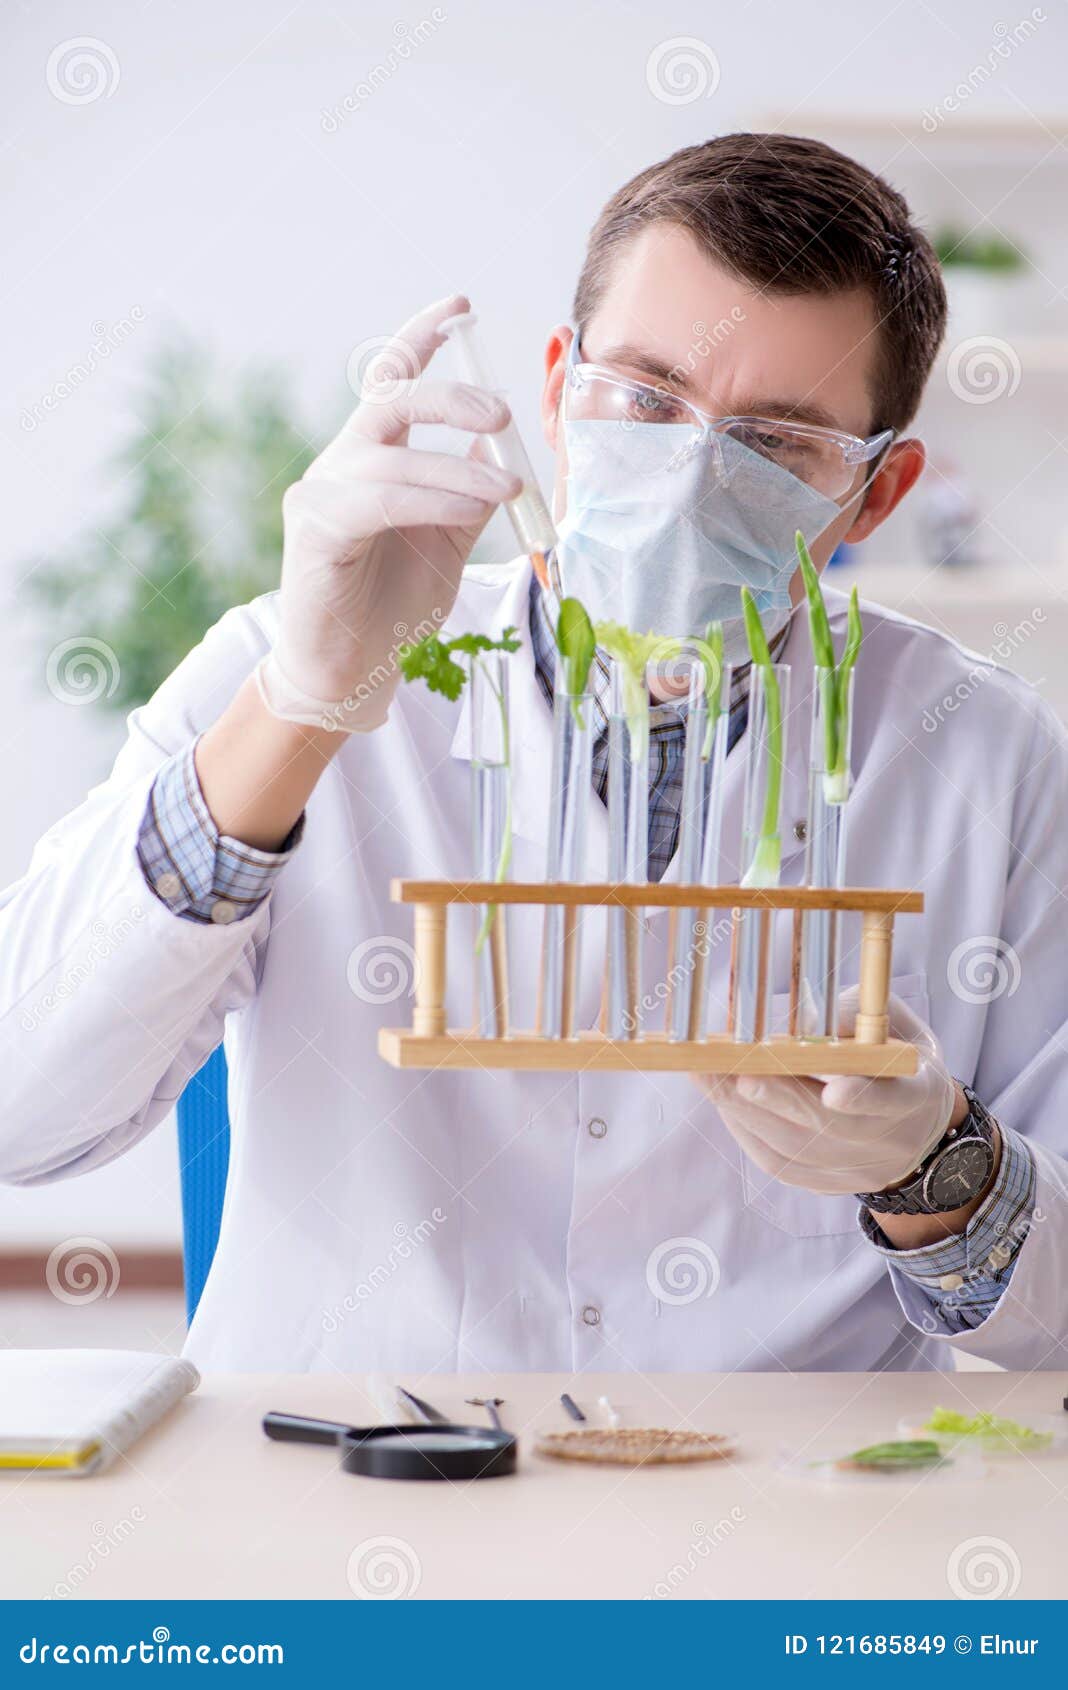 the male biochemist working in the lab on plants